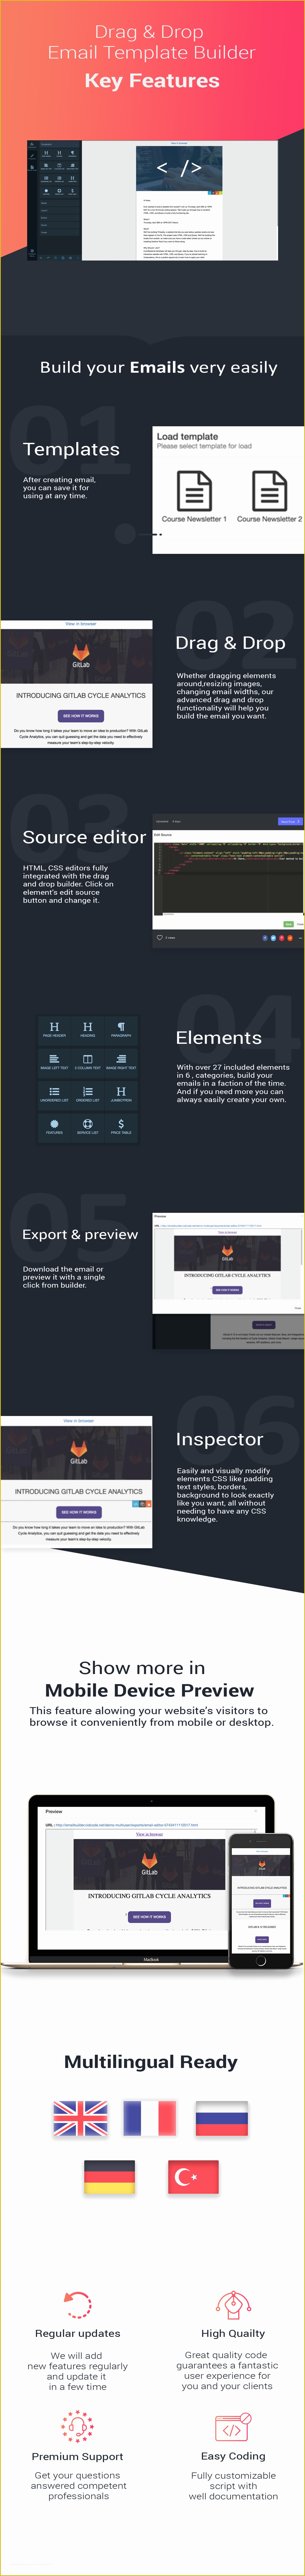 43 Free Email Template Builder Drag and Drop